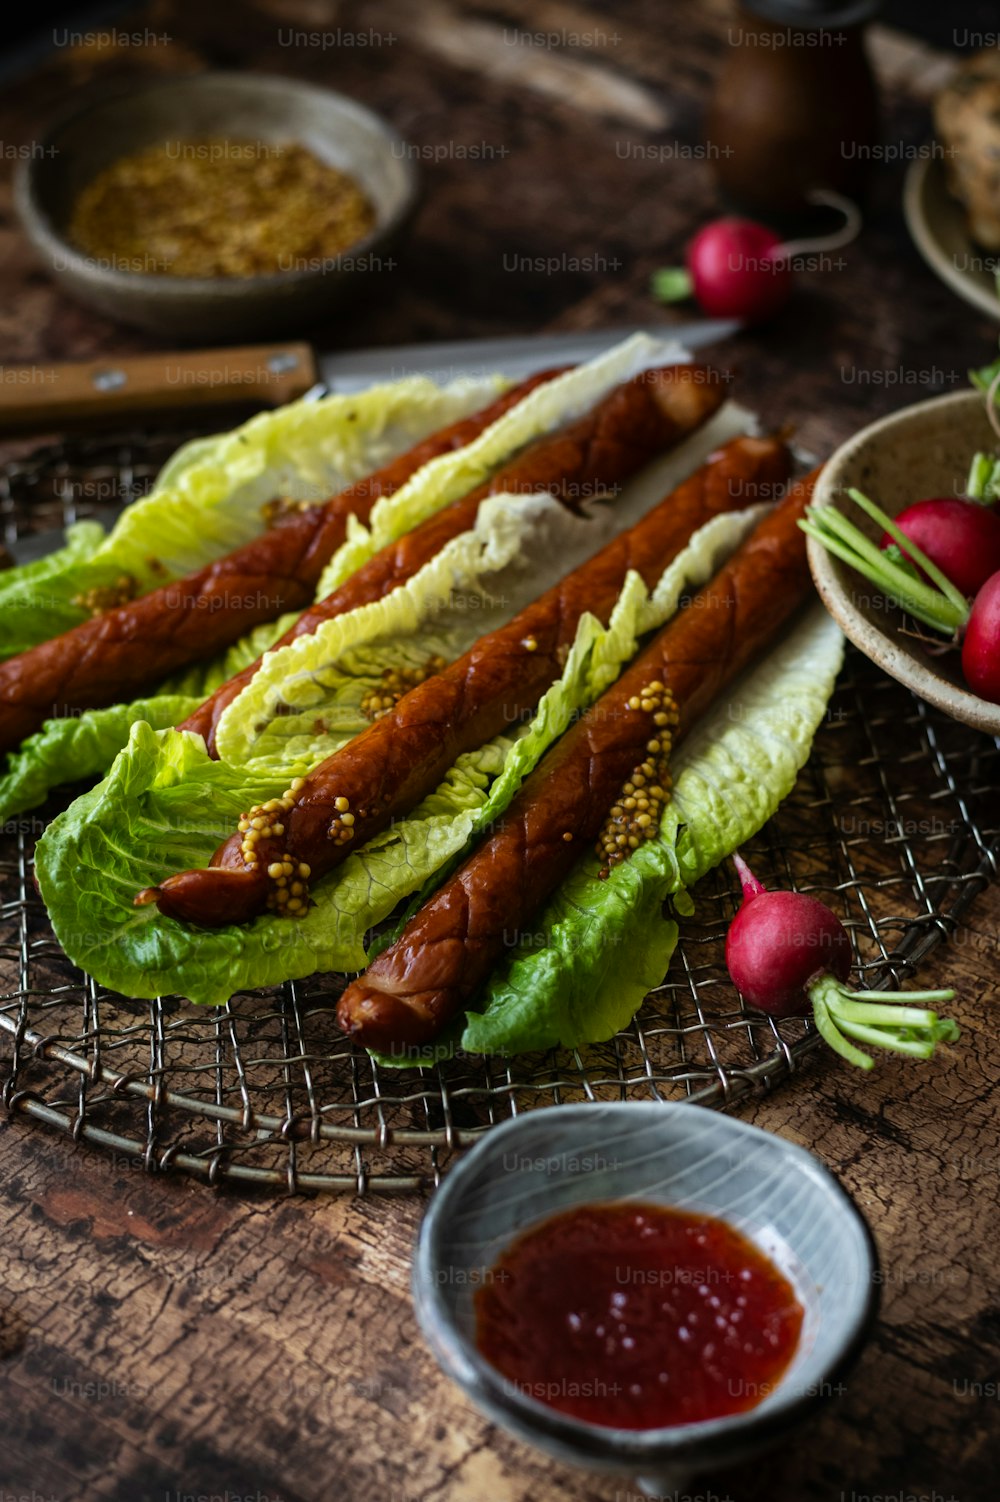 lettuce, radishes, and hotdogs on a wire rack